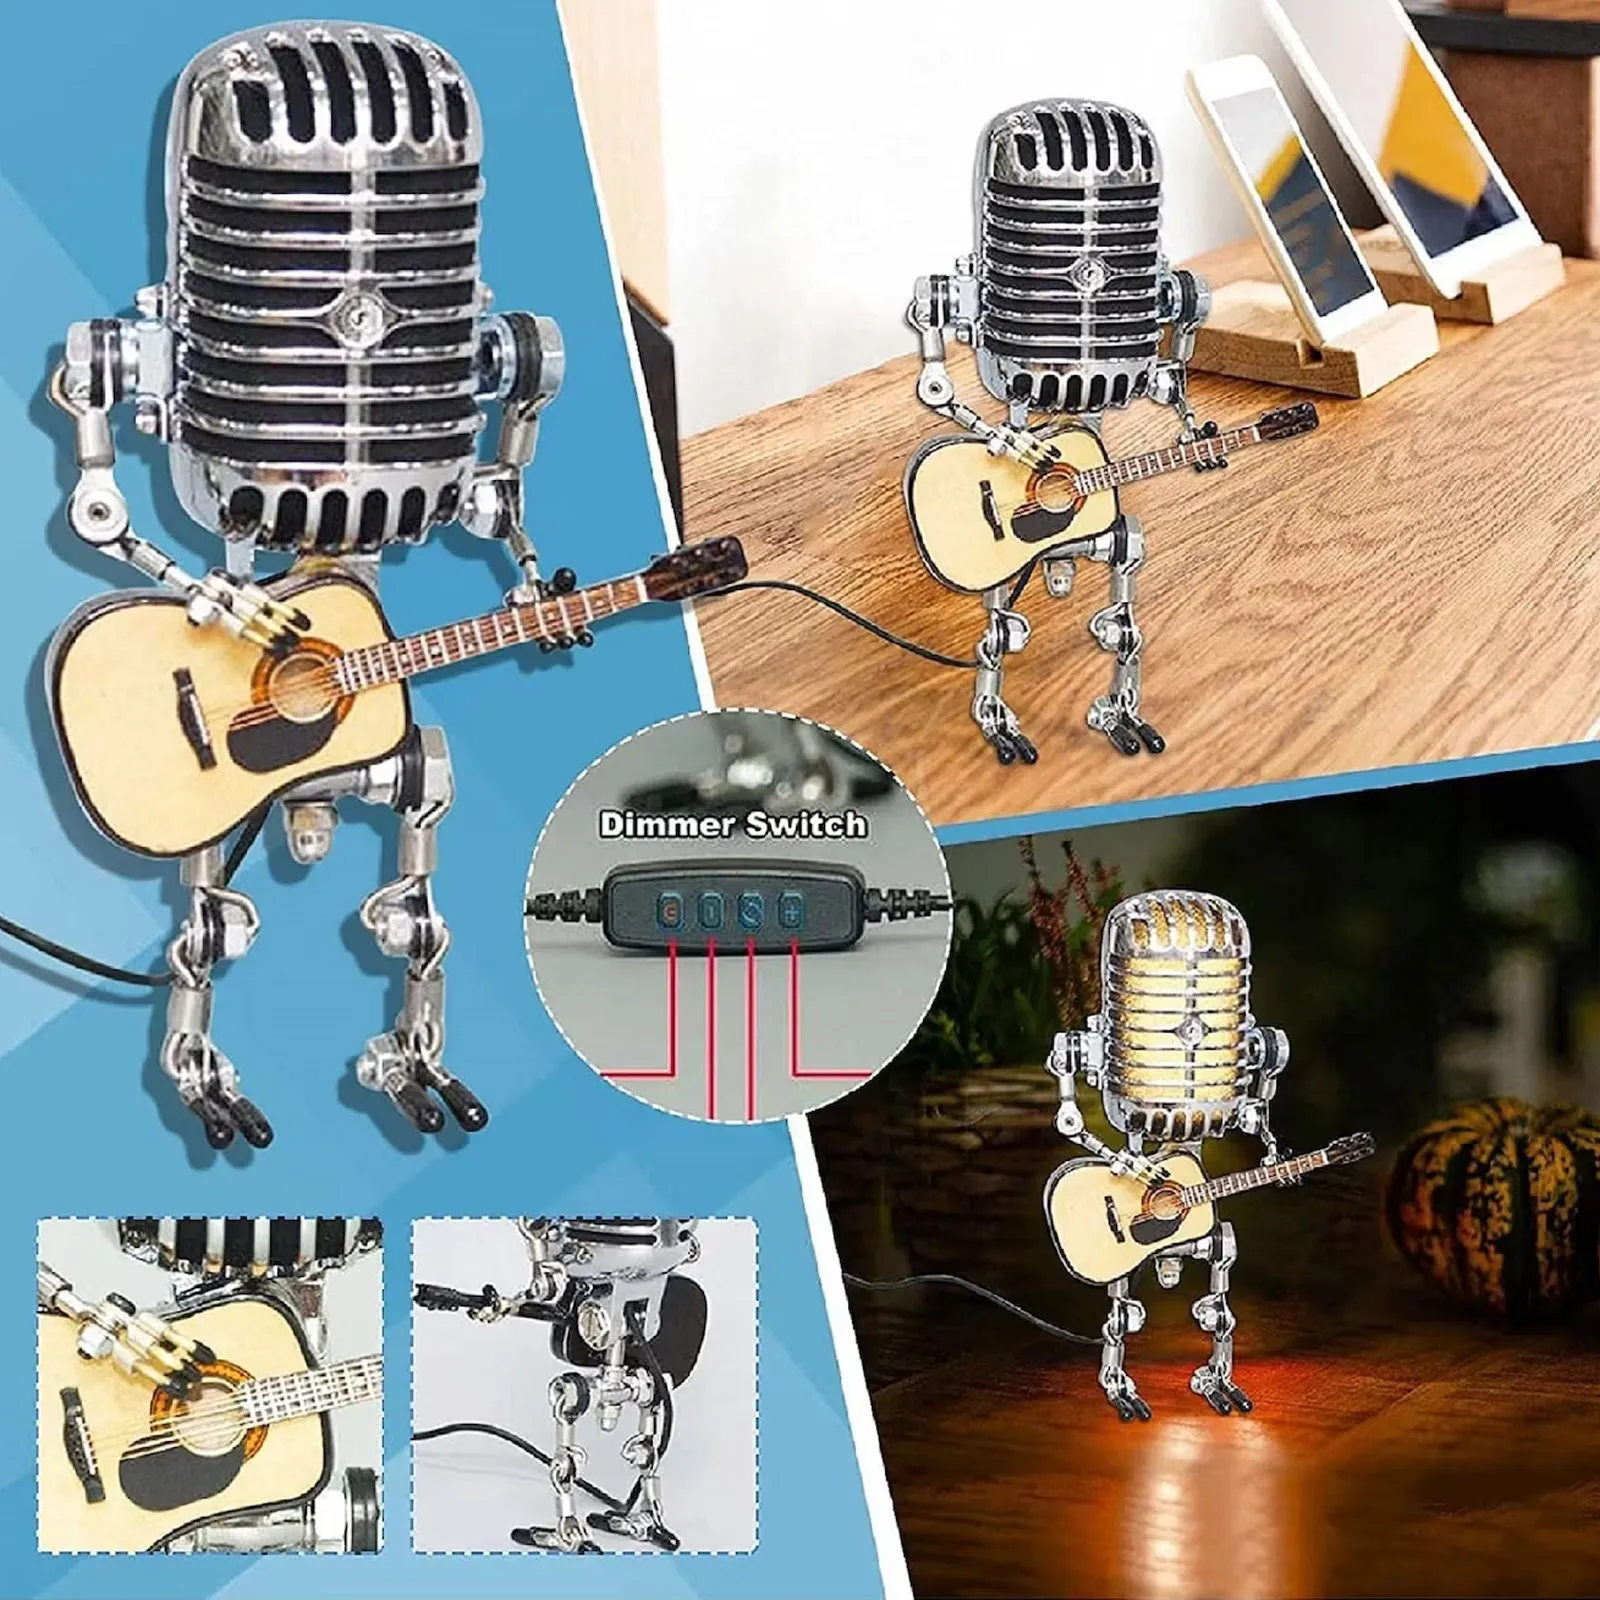 New Year's Sale - LAST DAY 70% OFF - Vintage Metal Microphone Robot Desk Lamp